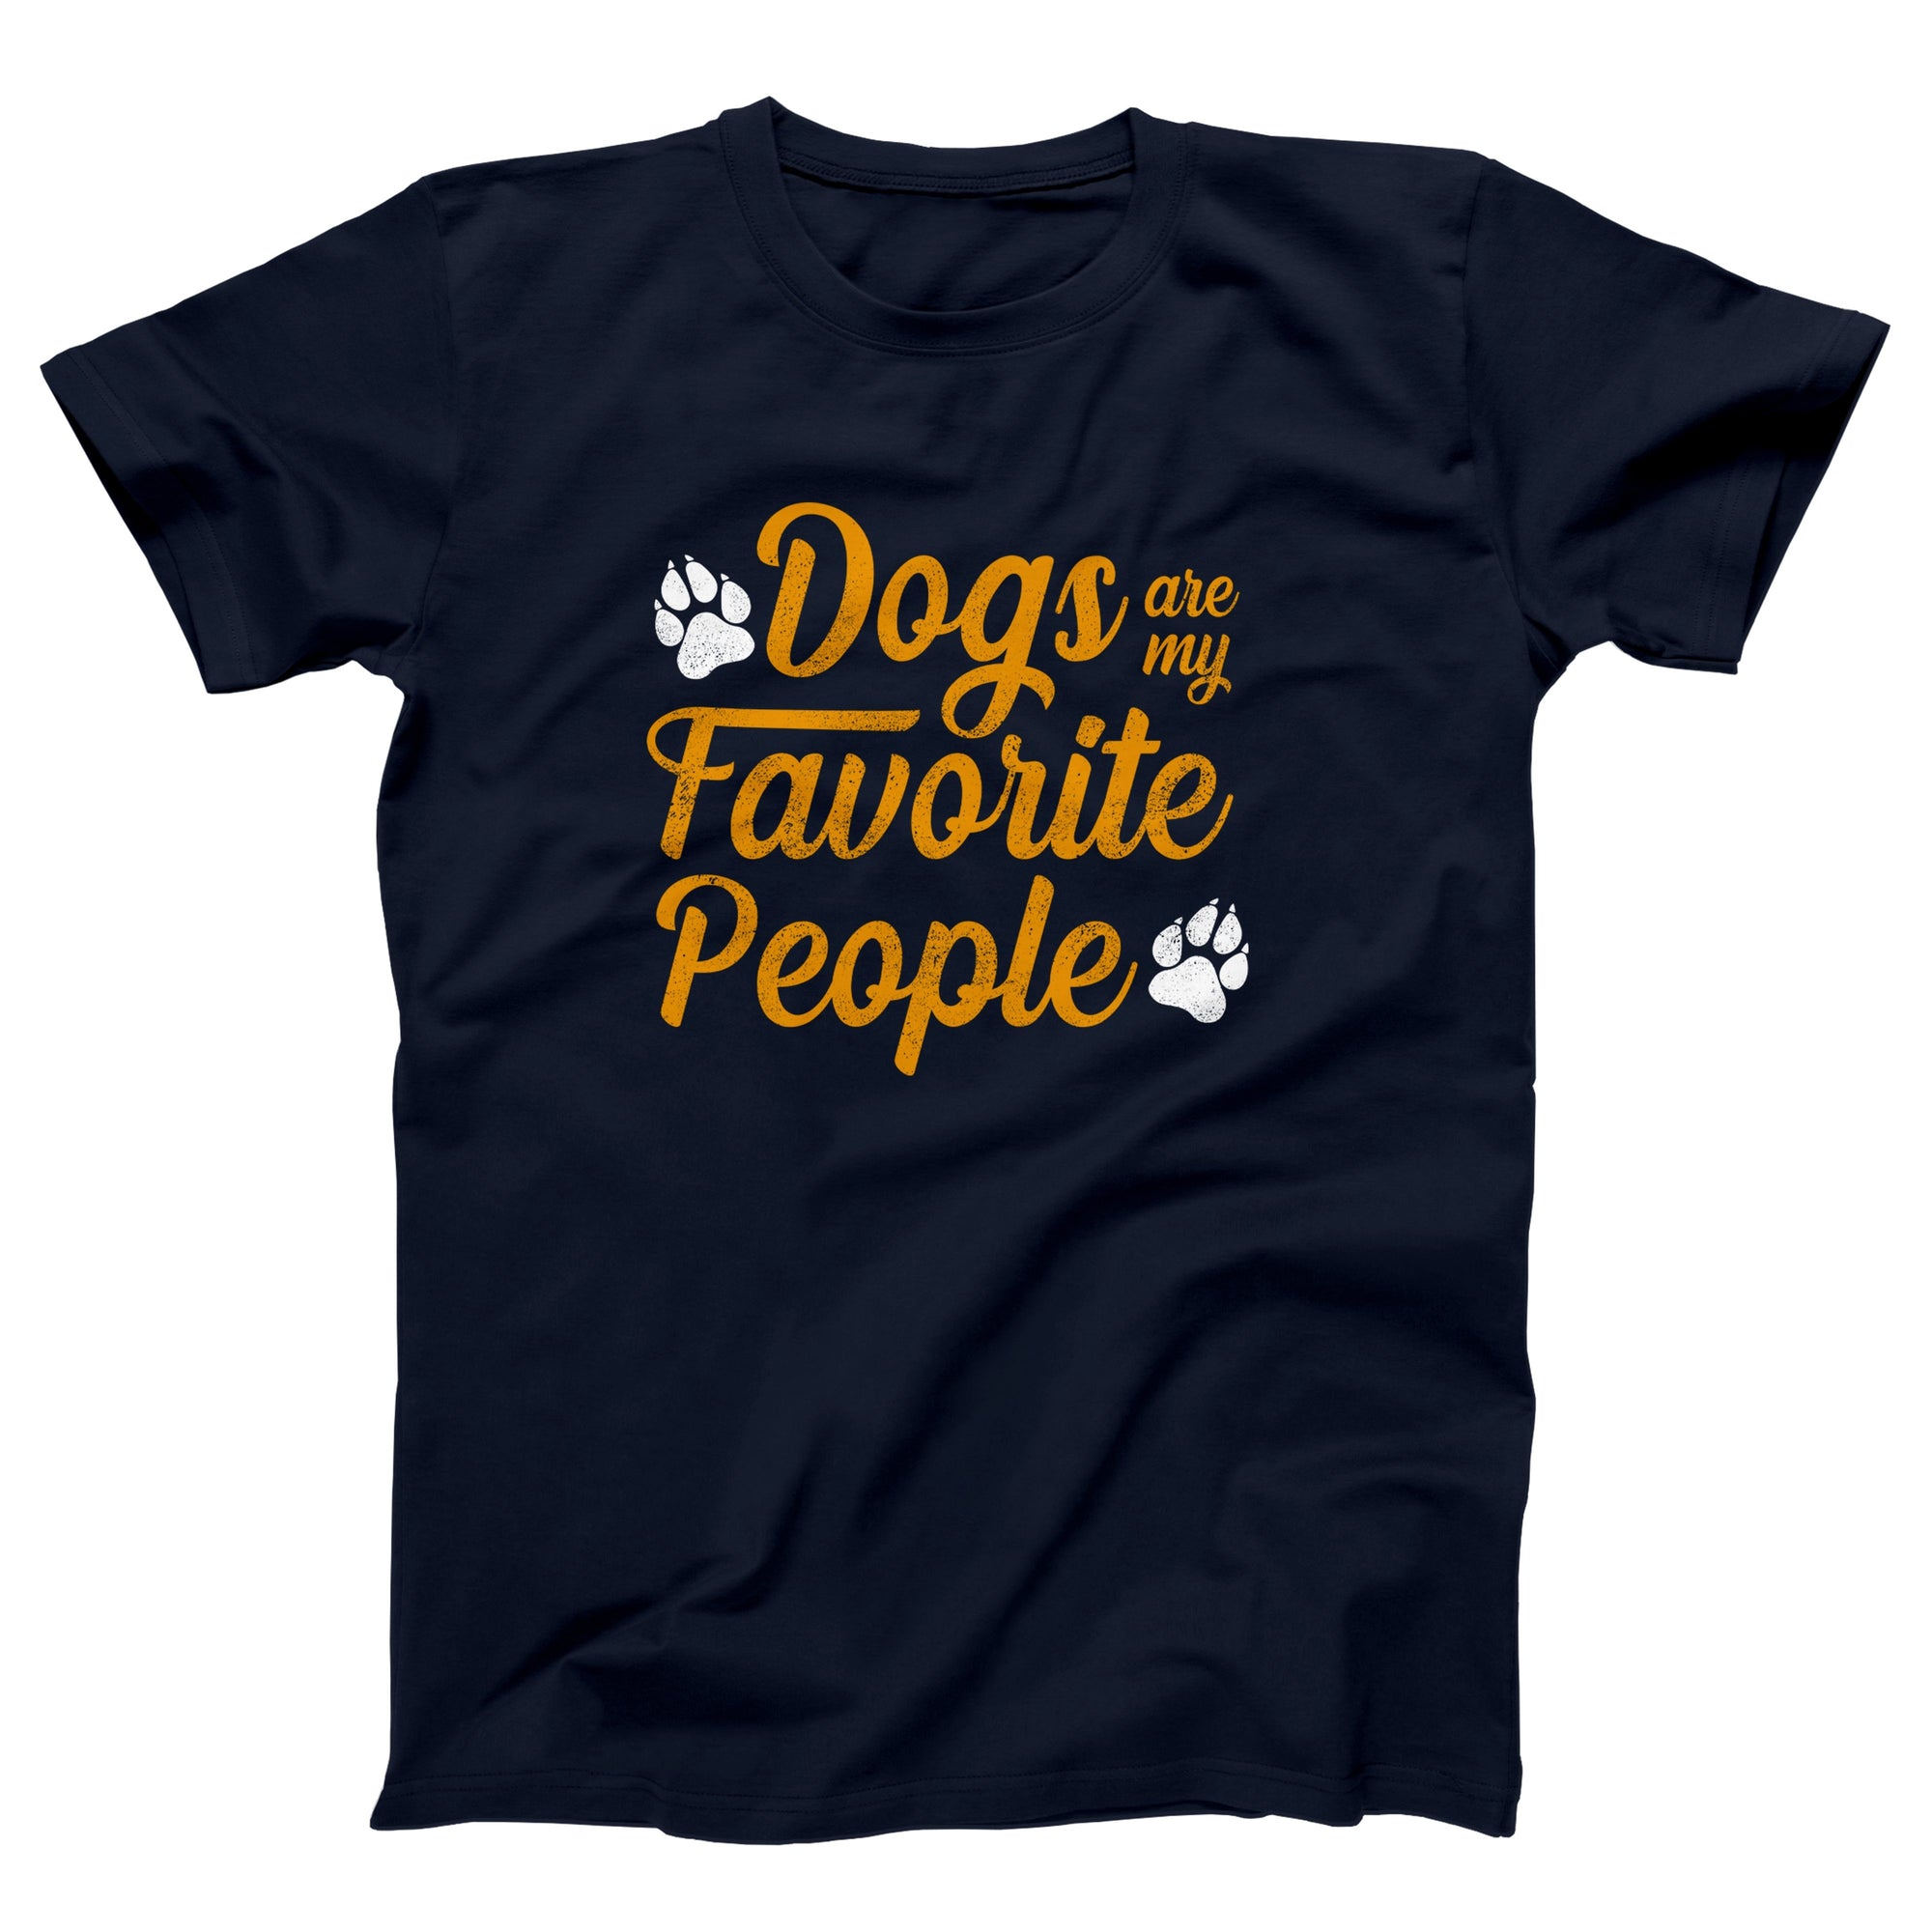 Dogs Are My Favorite People Adult Unisex T-Shirt - anishphilip